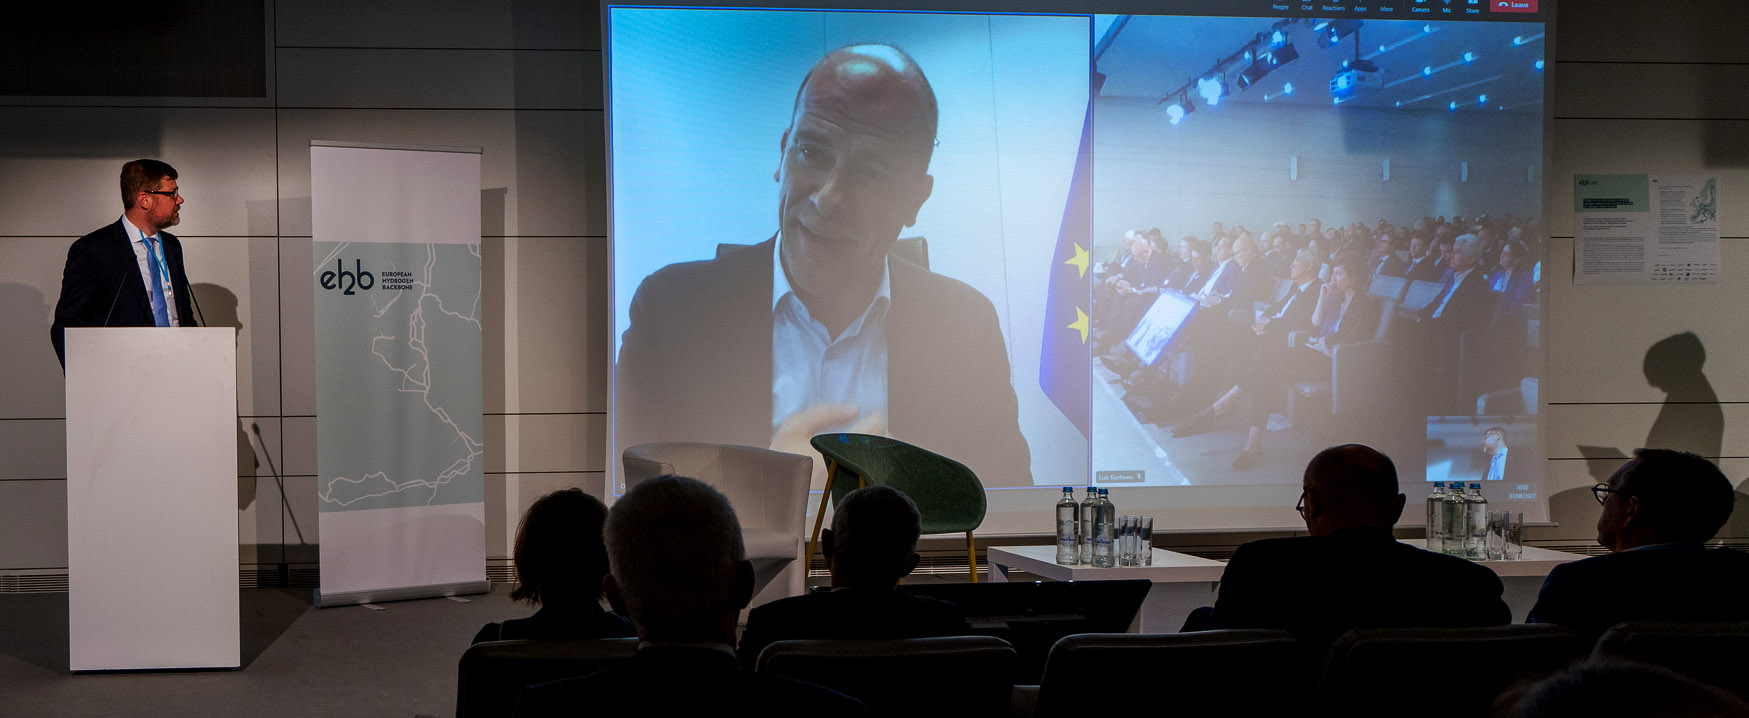 Diederik Samsom remotely joining the discussion